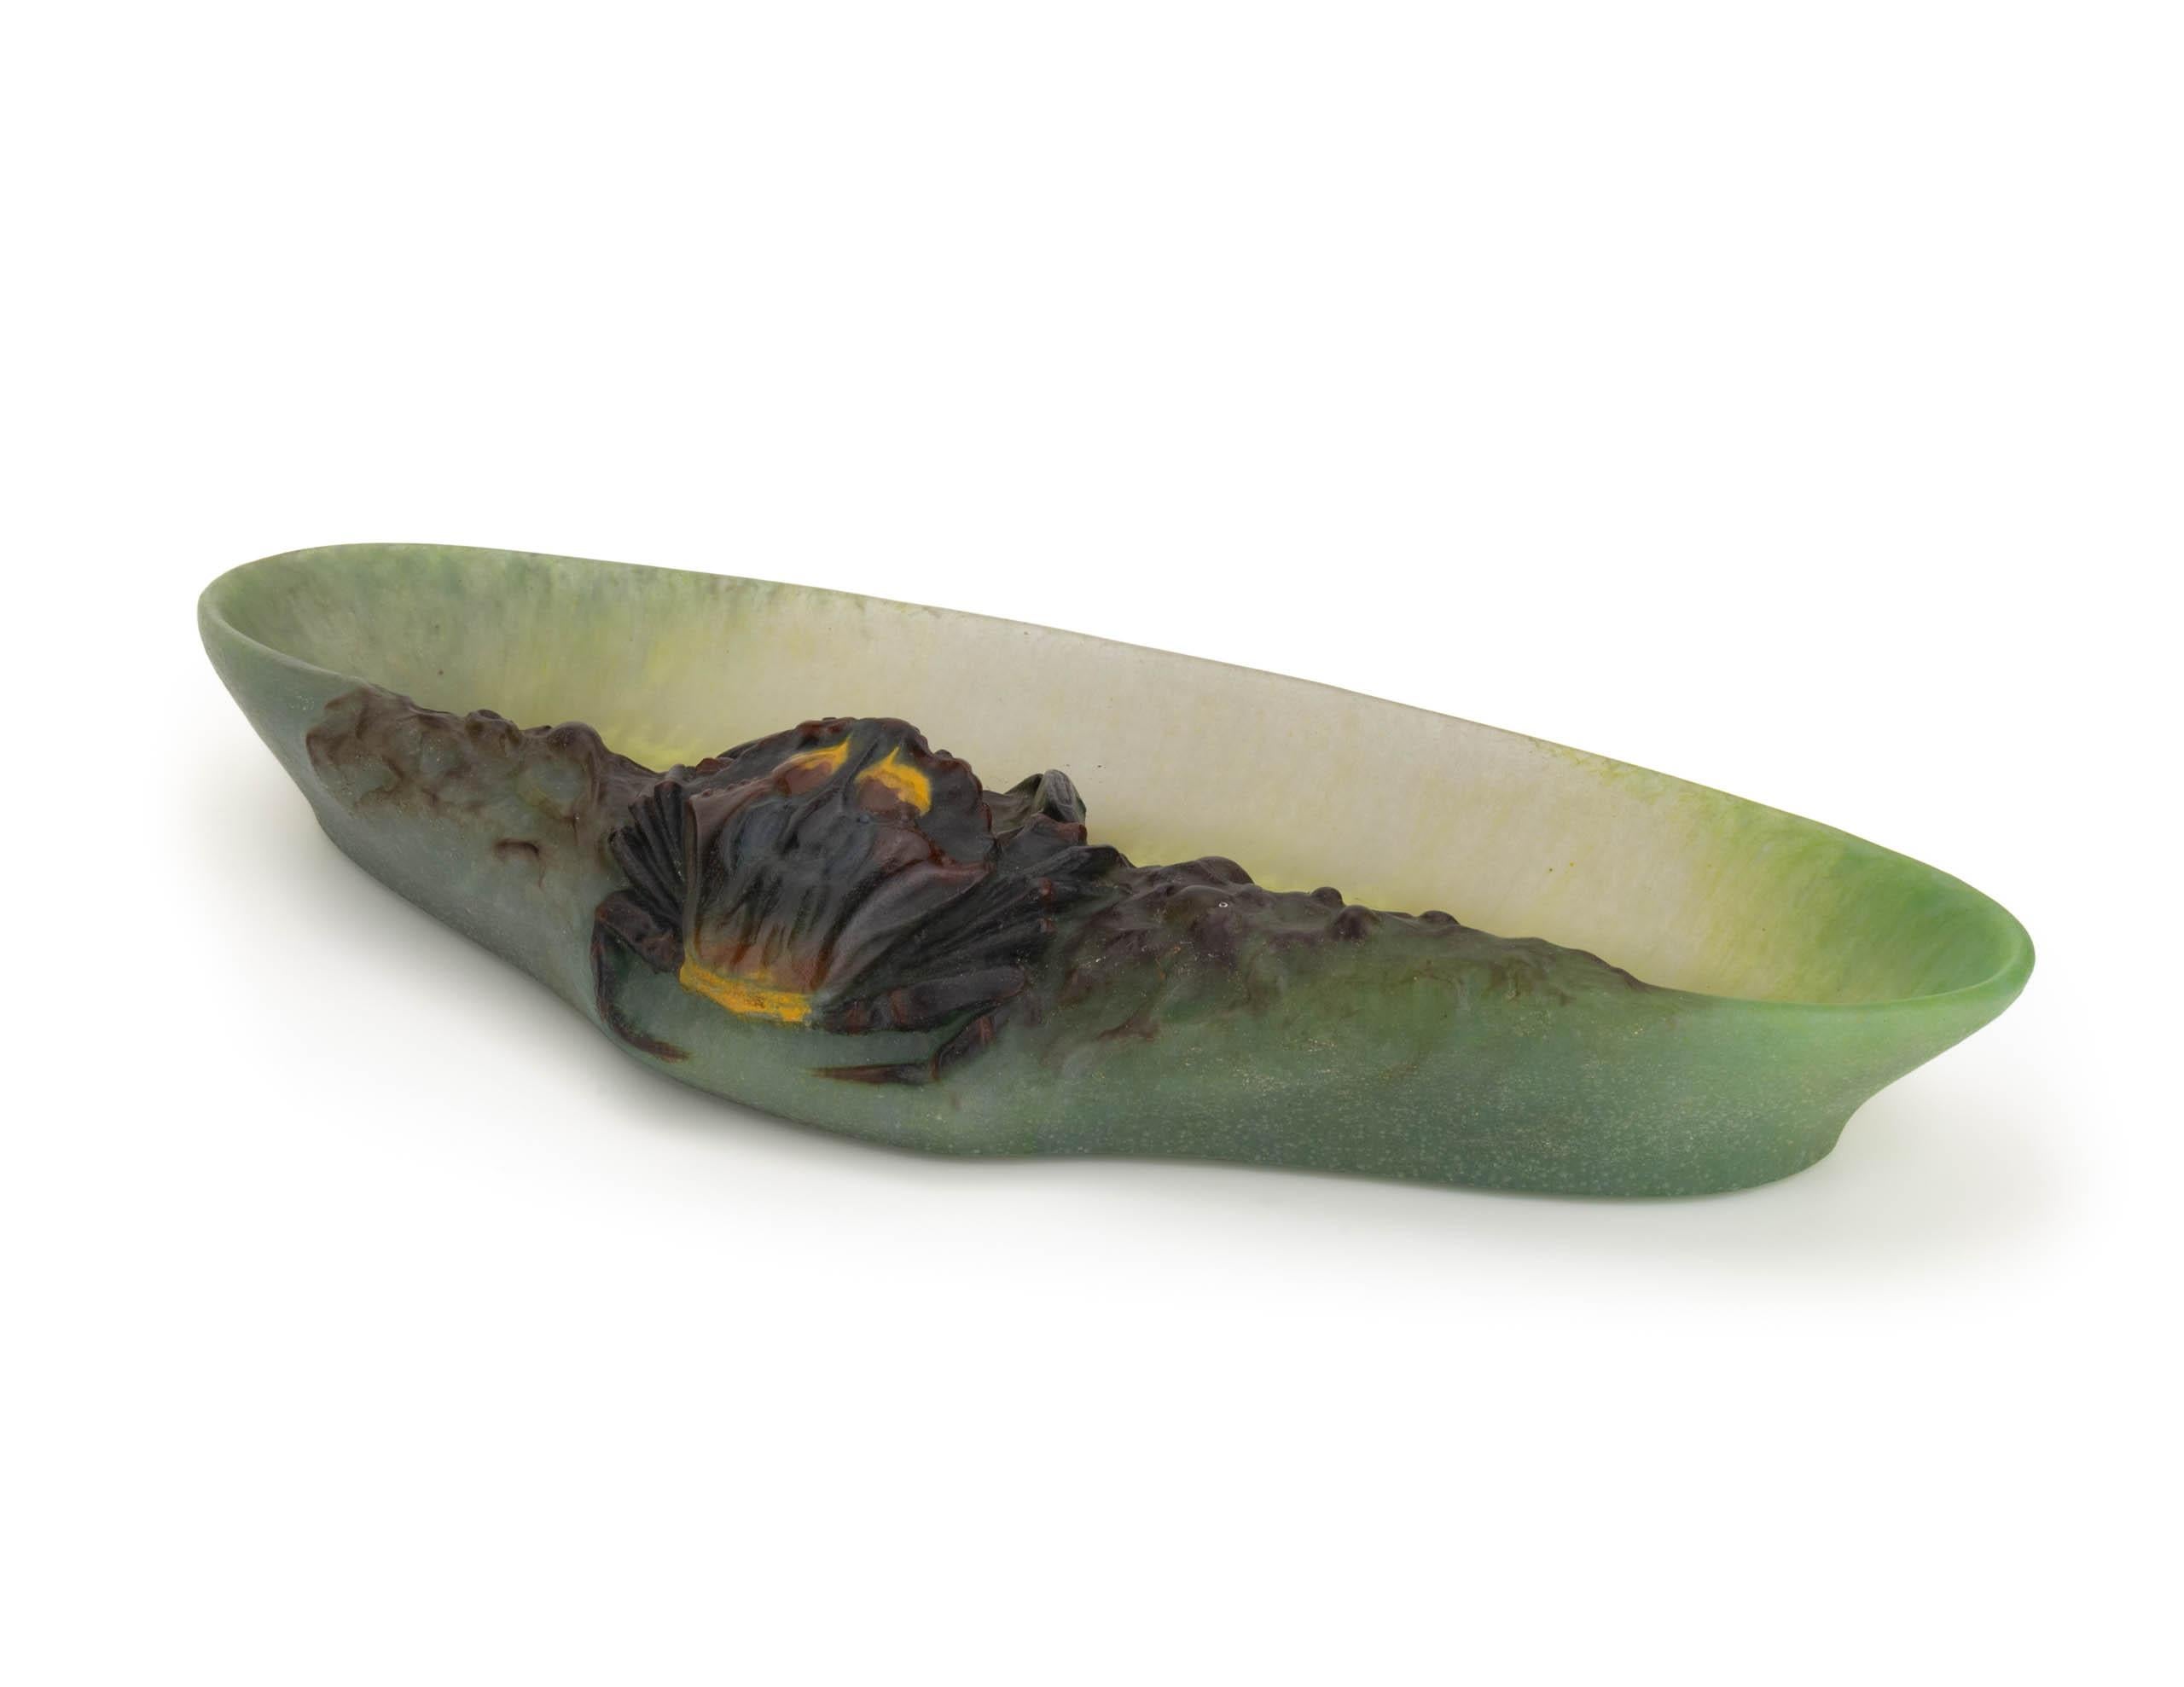 This plumier manufactured by Amalric Walter and Henri Bergé is executed in the theme of marine animals. The elongated bowl was obtained in several green and yellow swirling hues of color through the mixing and addition of glass powders after which